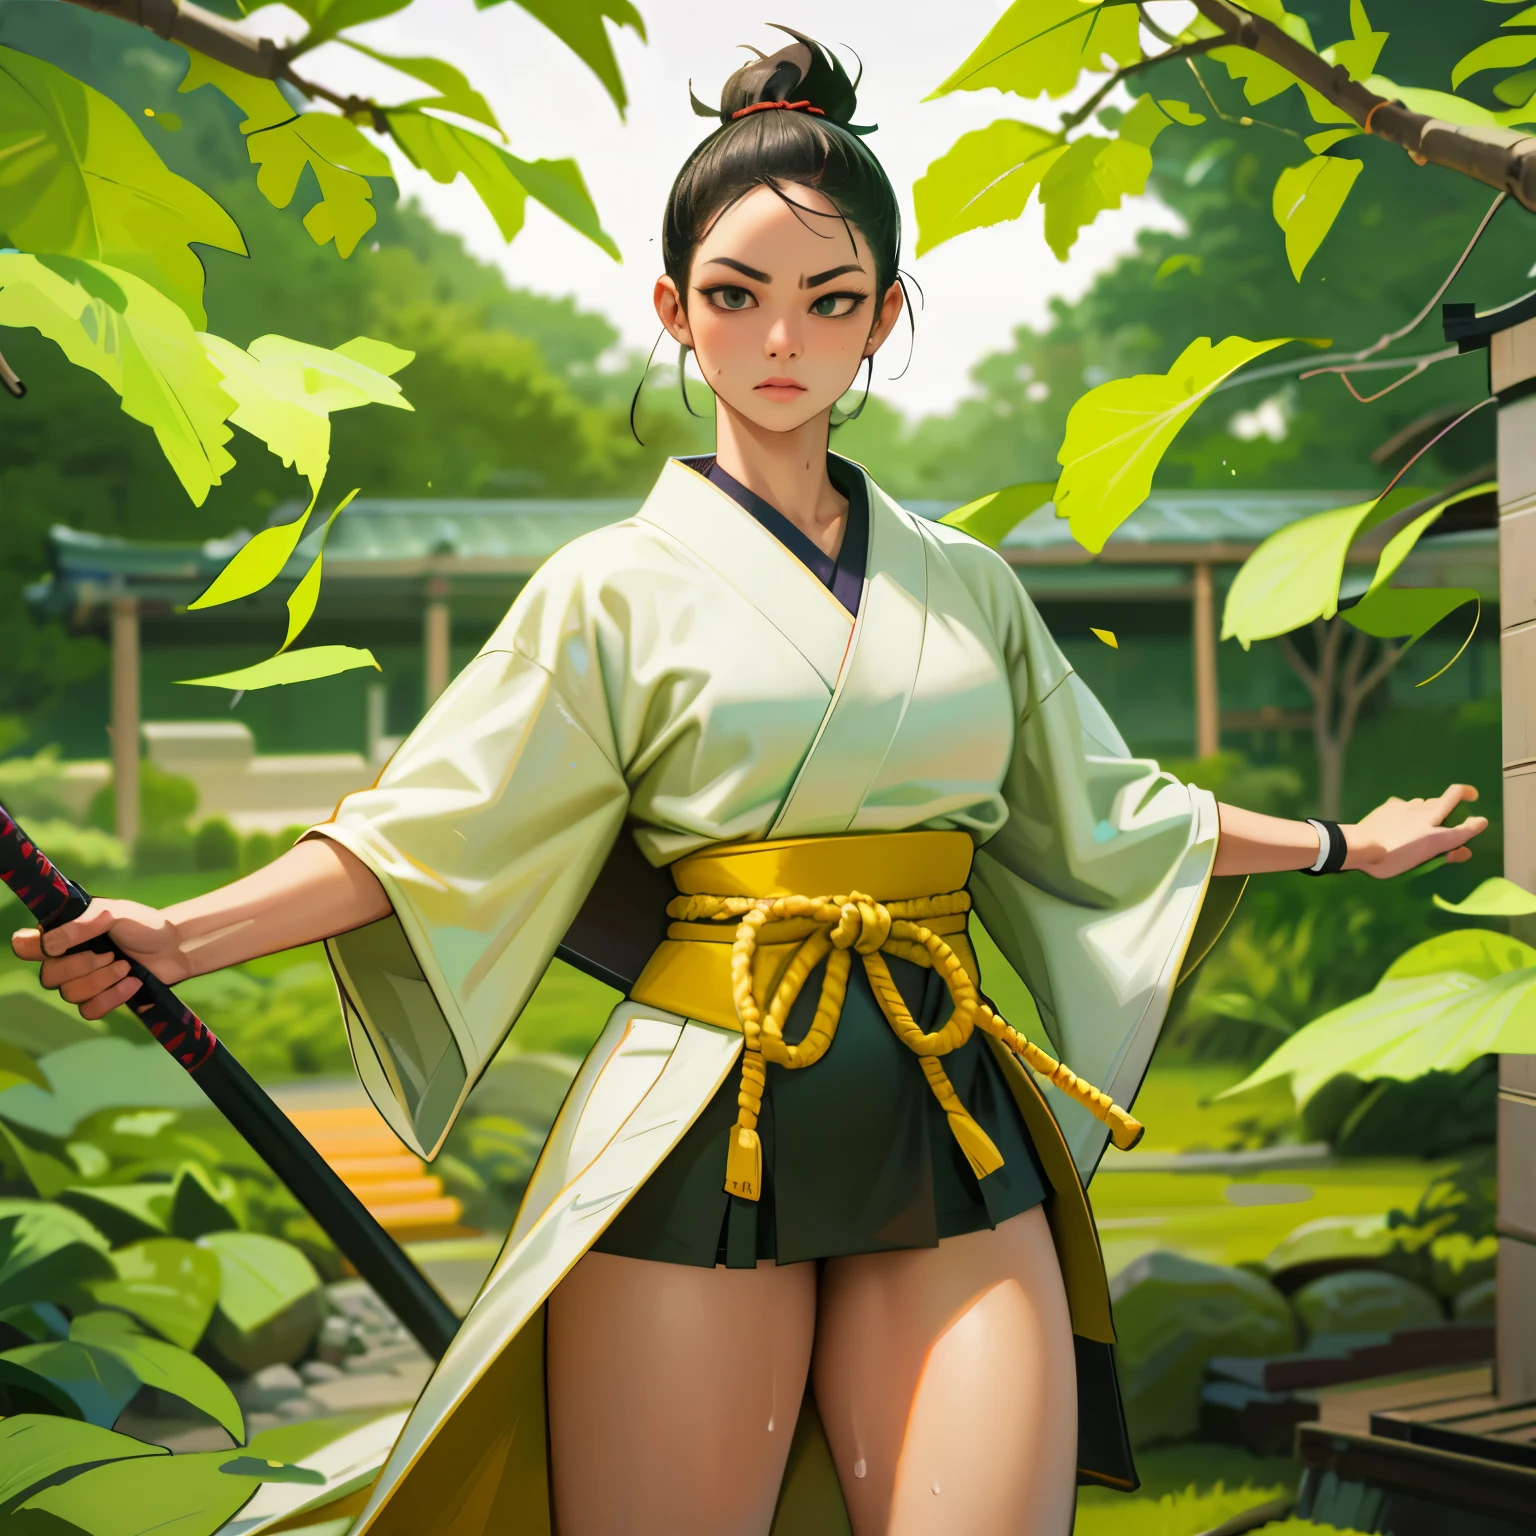 (best quality,ultra-detailed),(realistic,photorealistic:1.37),kendo outfit,martial arts,dougi,black belt,sexy,sweat,vivid colors,sharp focus,studio lighting,physically-based rendering,portraits,bokeh,colorful,dynamic lighting,confident stance,dynamic movement,traditional Japanese weapon,strenuous training,athleticism,katana,samurai spirit,intense concentration,competitive spirit,graceful movements,strong physique,endurance,training warehouse,traditional dojo,traditional Japanese architecture,traditional Japanese garden,serene atmosphere,striking poses,impressive techniques,dedication,excellence,master-level skills,black headband,dedicated practice,strong willpower